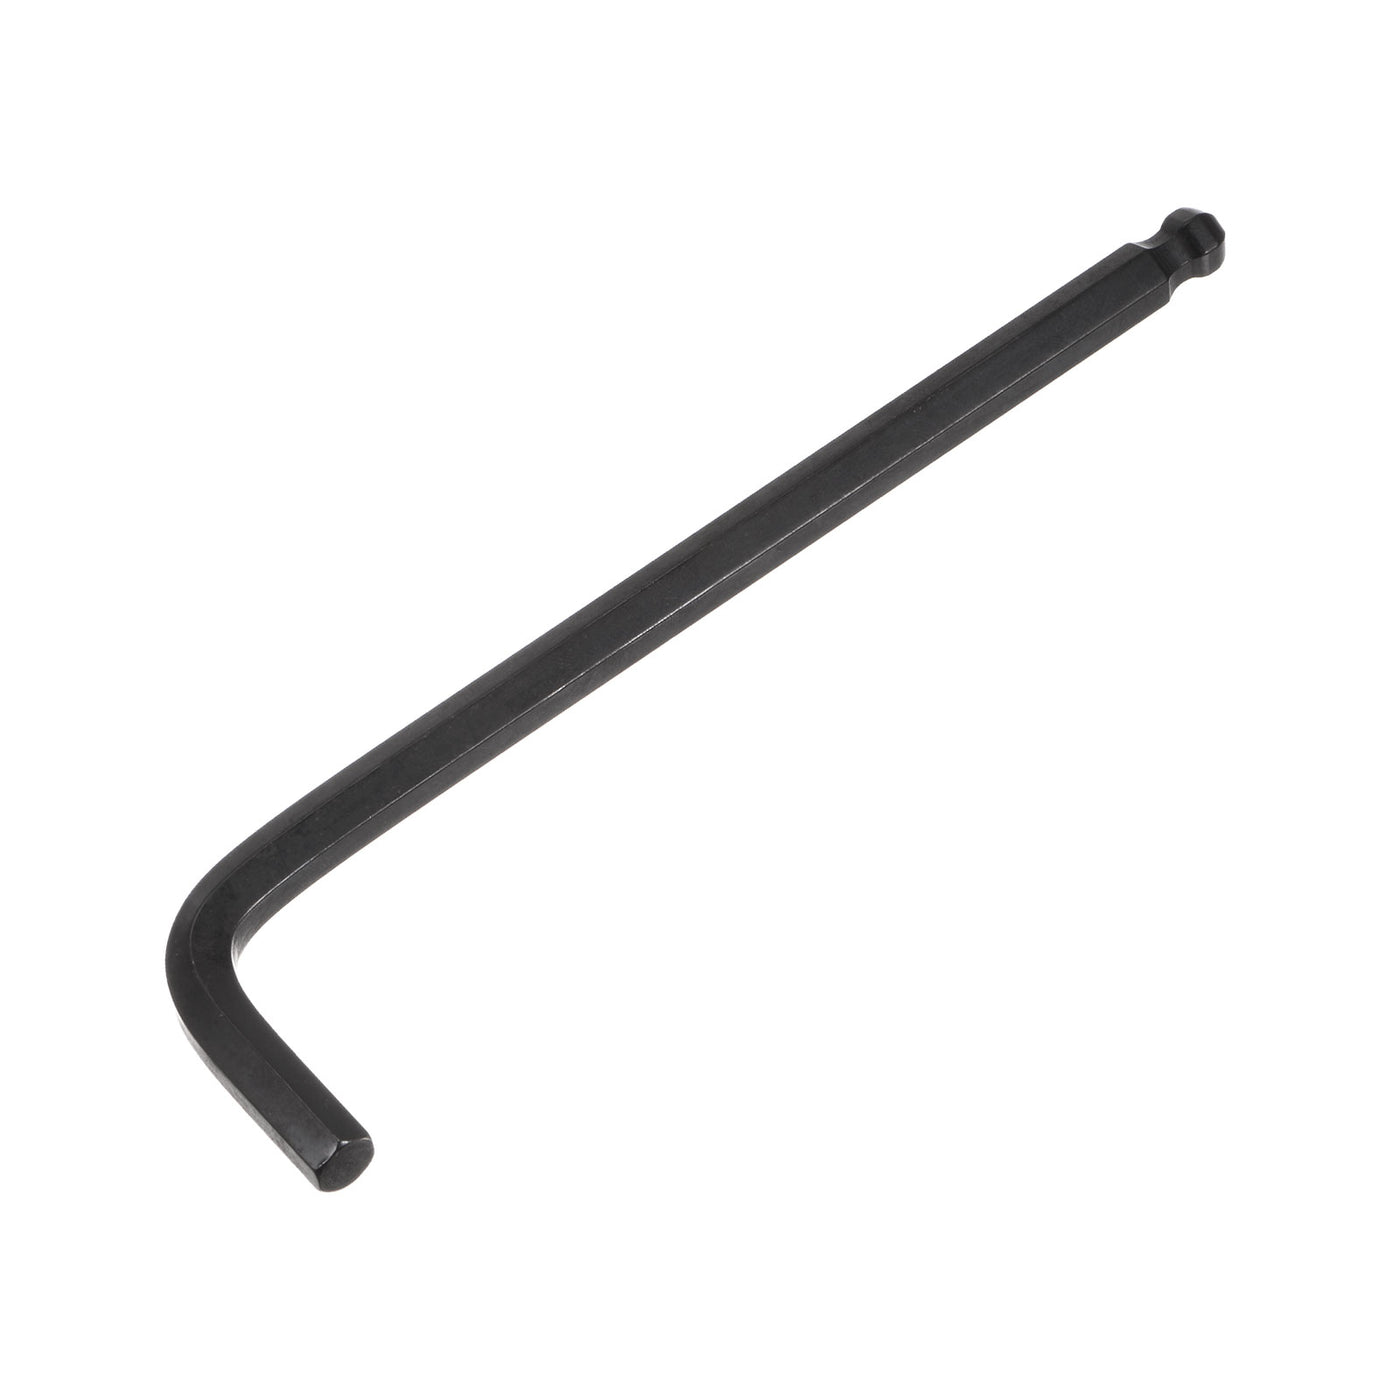 uxcell Uxcell 5/16" Ball End Hex Key Wrench, L Shaped Long Arm CR-V Repairing Tool, Black